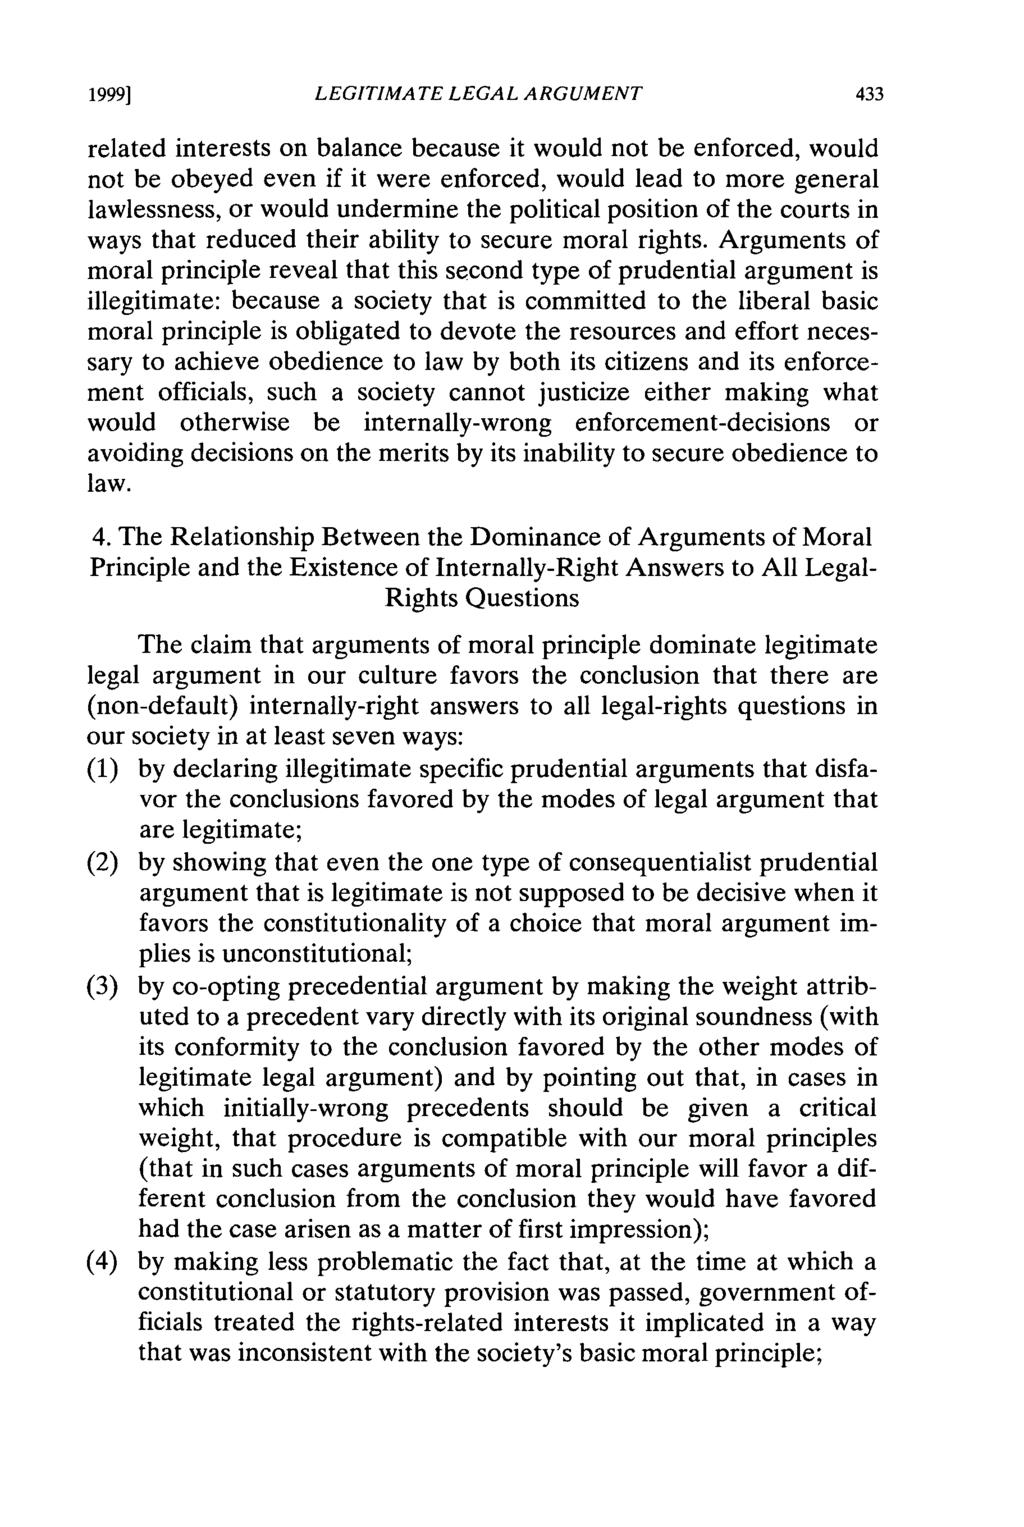 1999] LEGITIMATE LEGAL ARGUMENT related interests on balance because it would not be enforced, would not be obeyed even if it were enforced, would lead to more general lawlessness, or would undermine